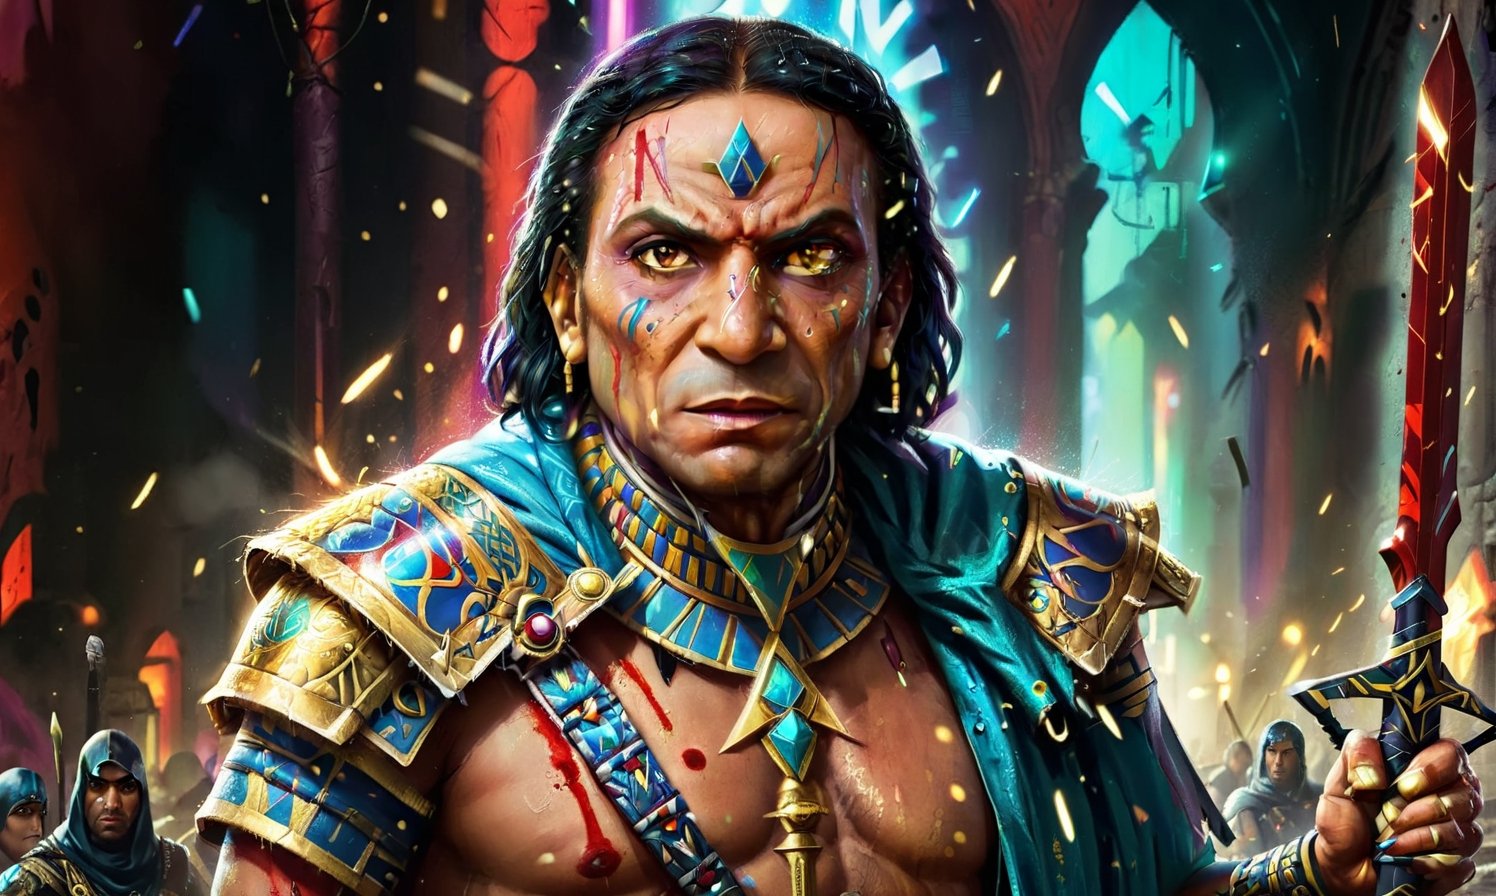 Egyptian warrior phoroh king, evil look, wearing ancinet egyptian clothes, blood on face, wounds in face, adel emam with sword in his hand, High detailed, Color magic,cyberpunk style,adel emam,LegendDarkFantasy,photo r3al,colorful,color art,color chaos